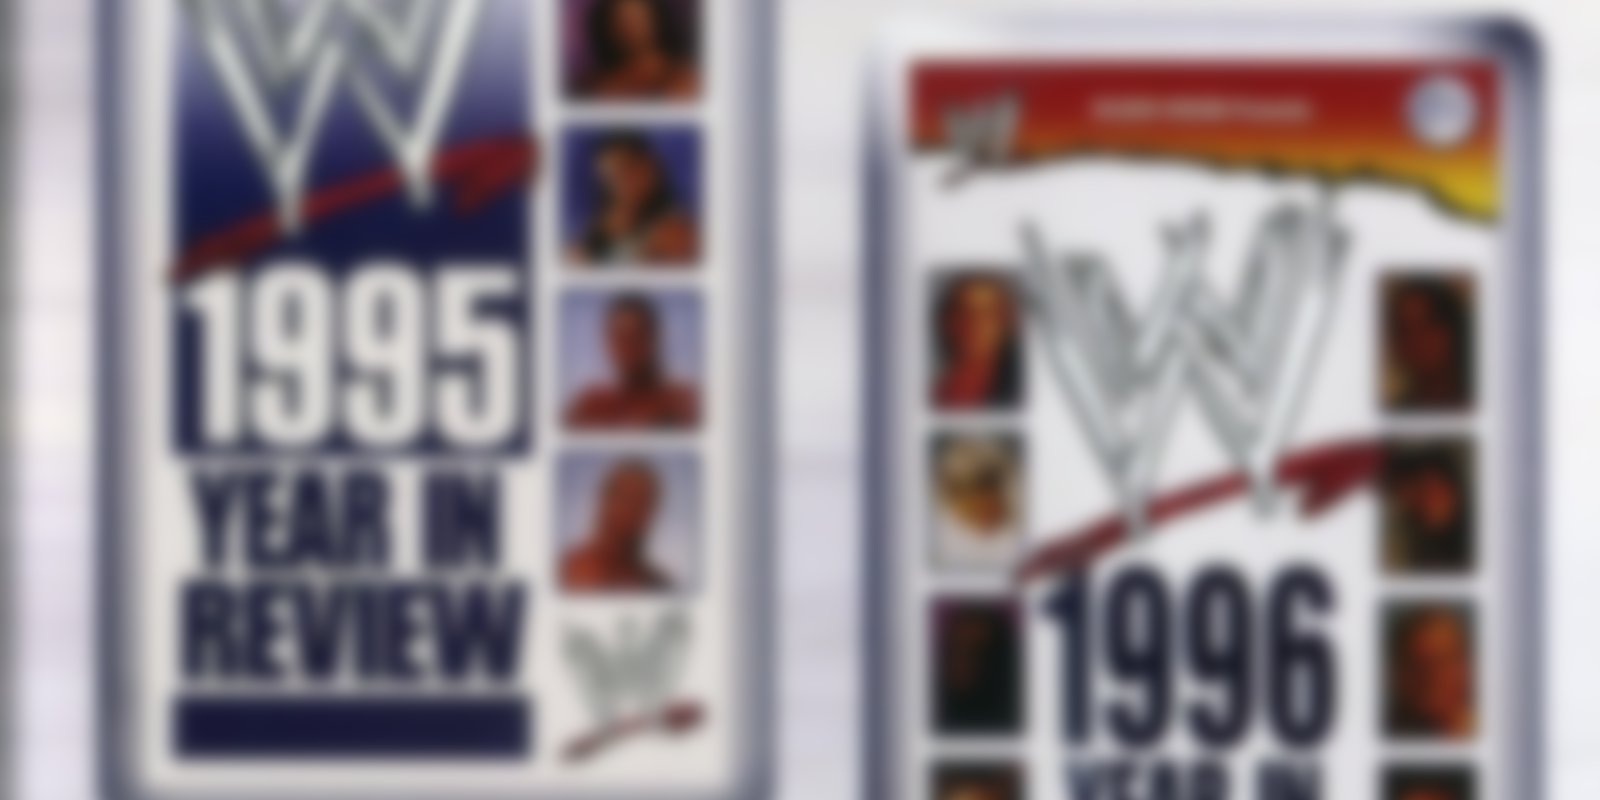 WWE - Year in Review 1995 & 1996